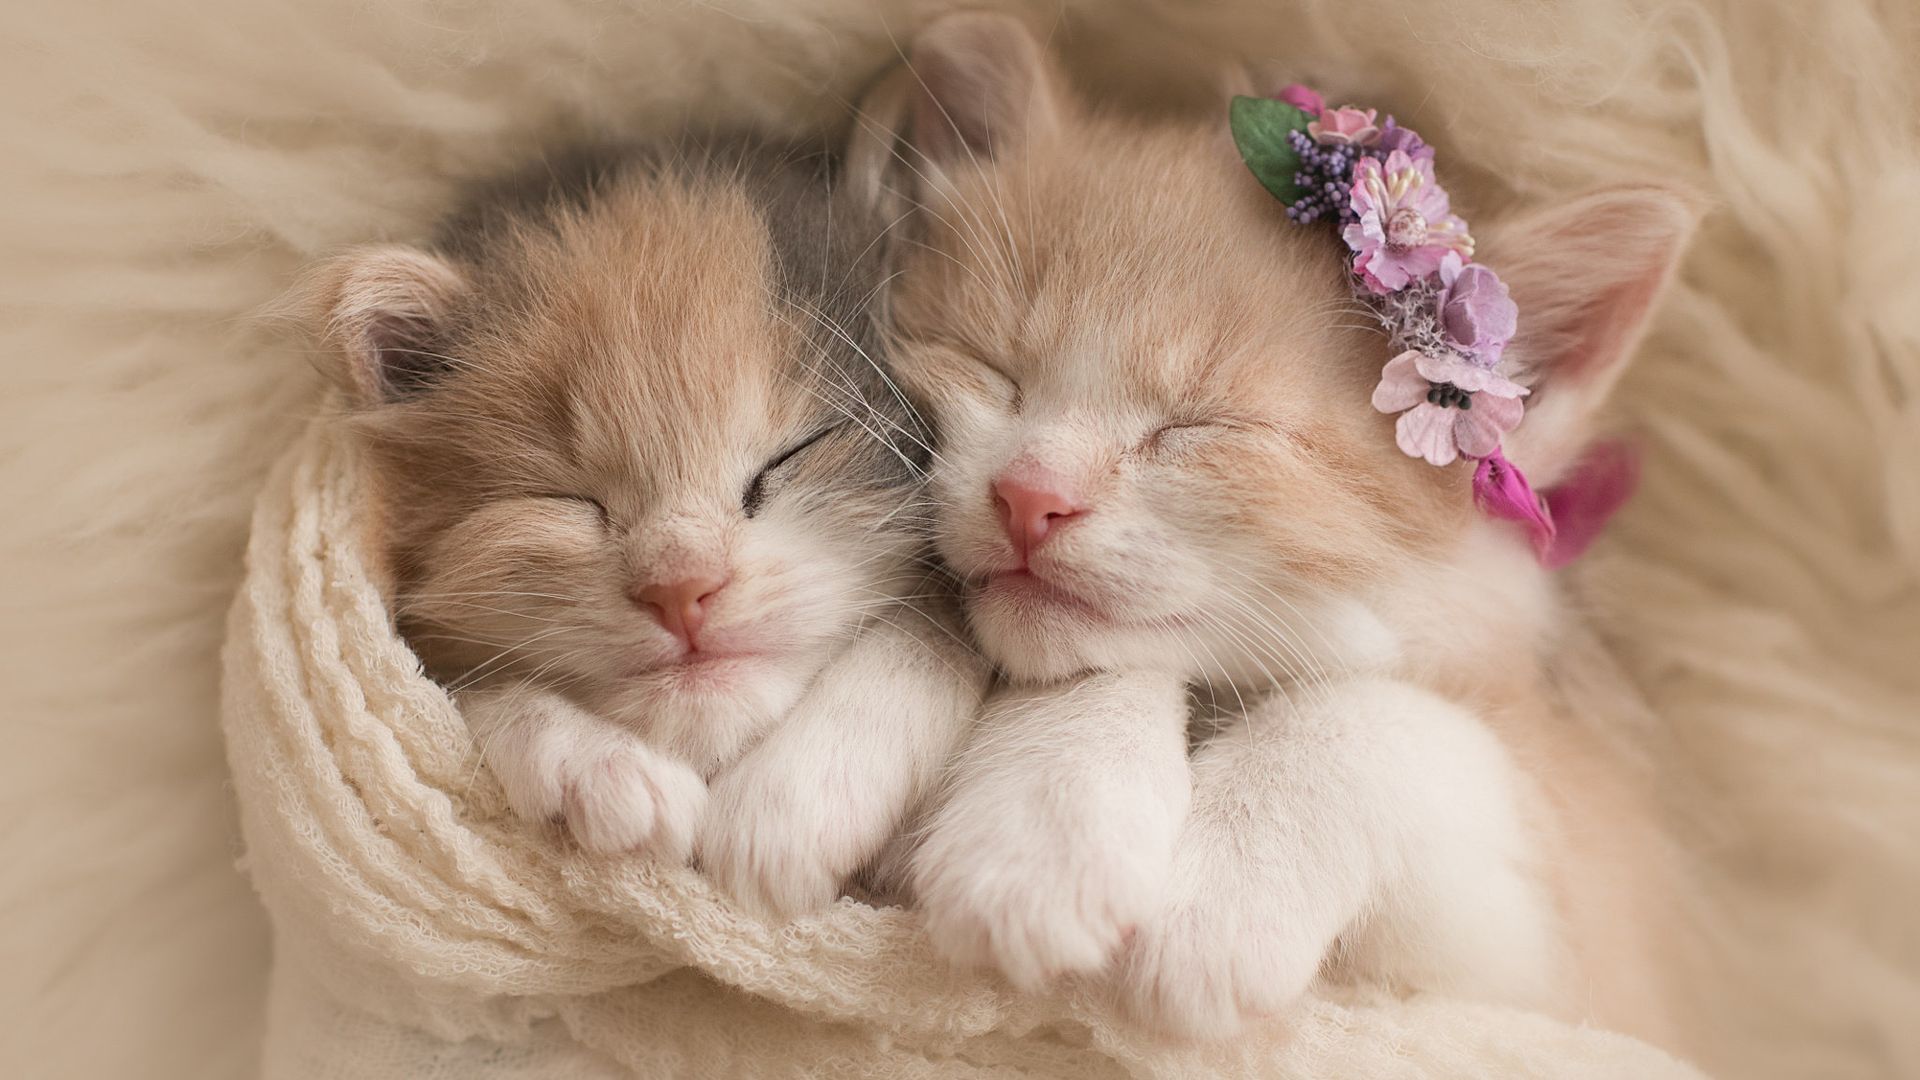 Kittens Sleeping Together Free Wallpaper HQ